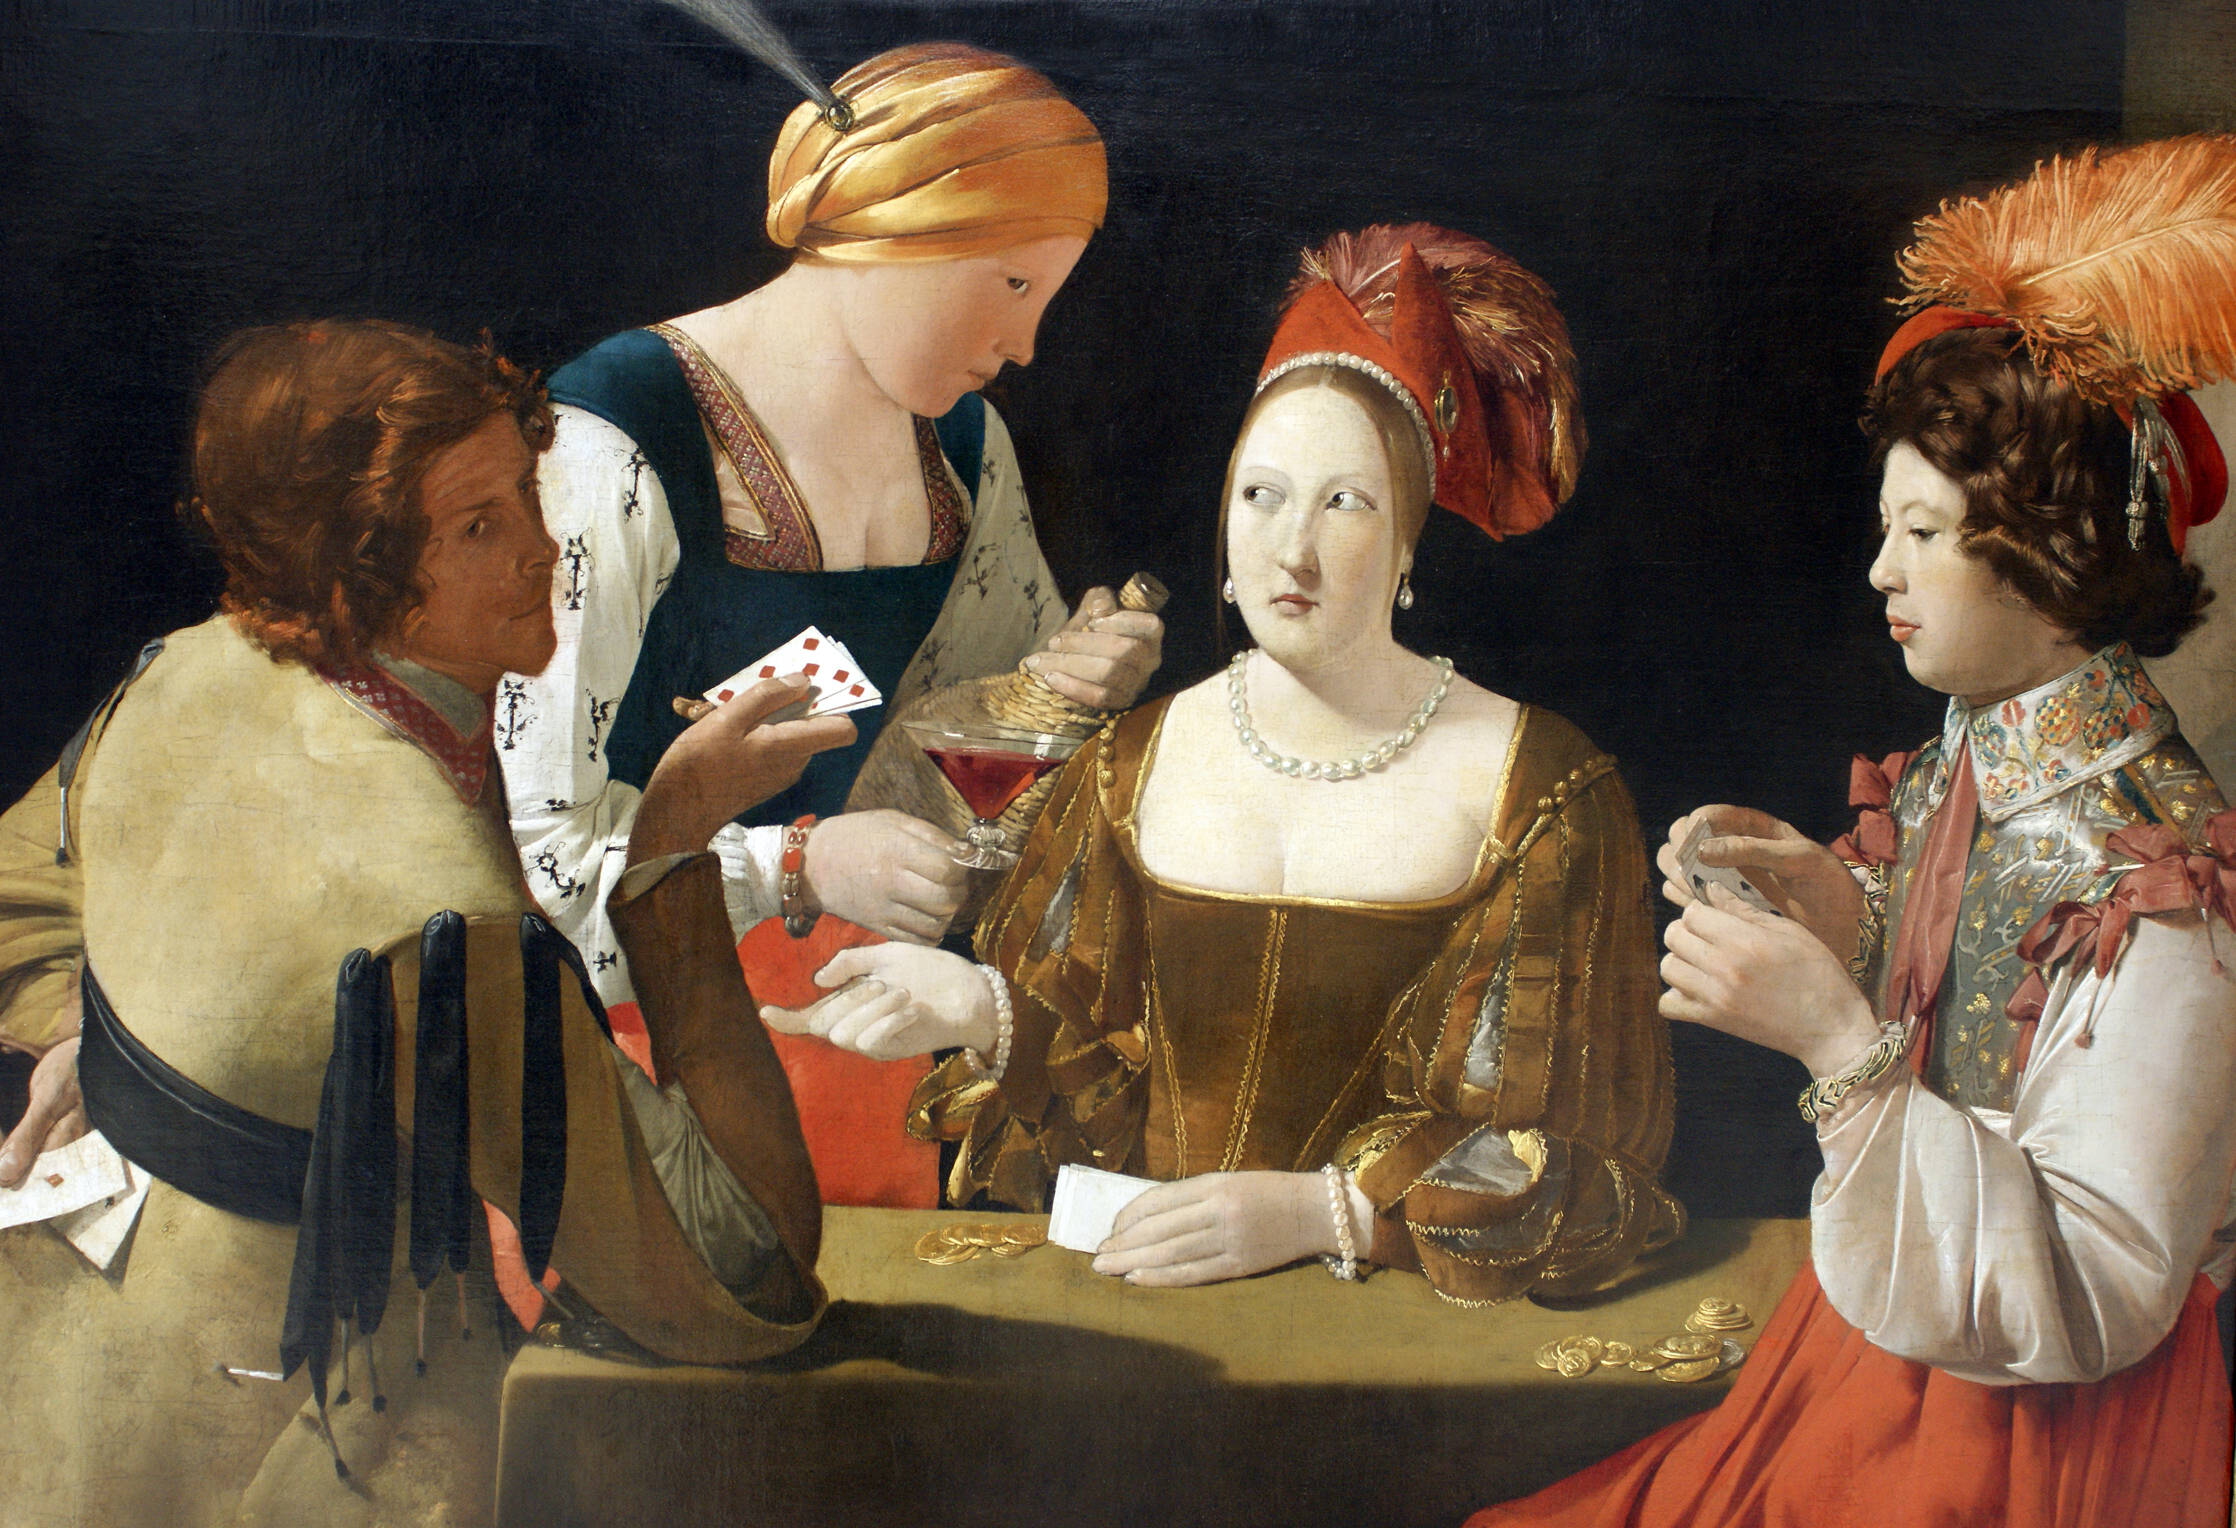 Things to see when at the Louvre Museum - The cheat with the ace of diamonds